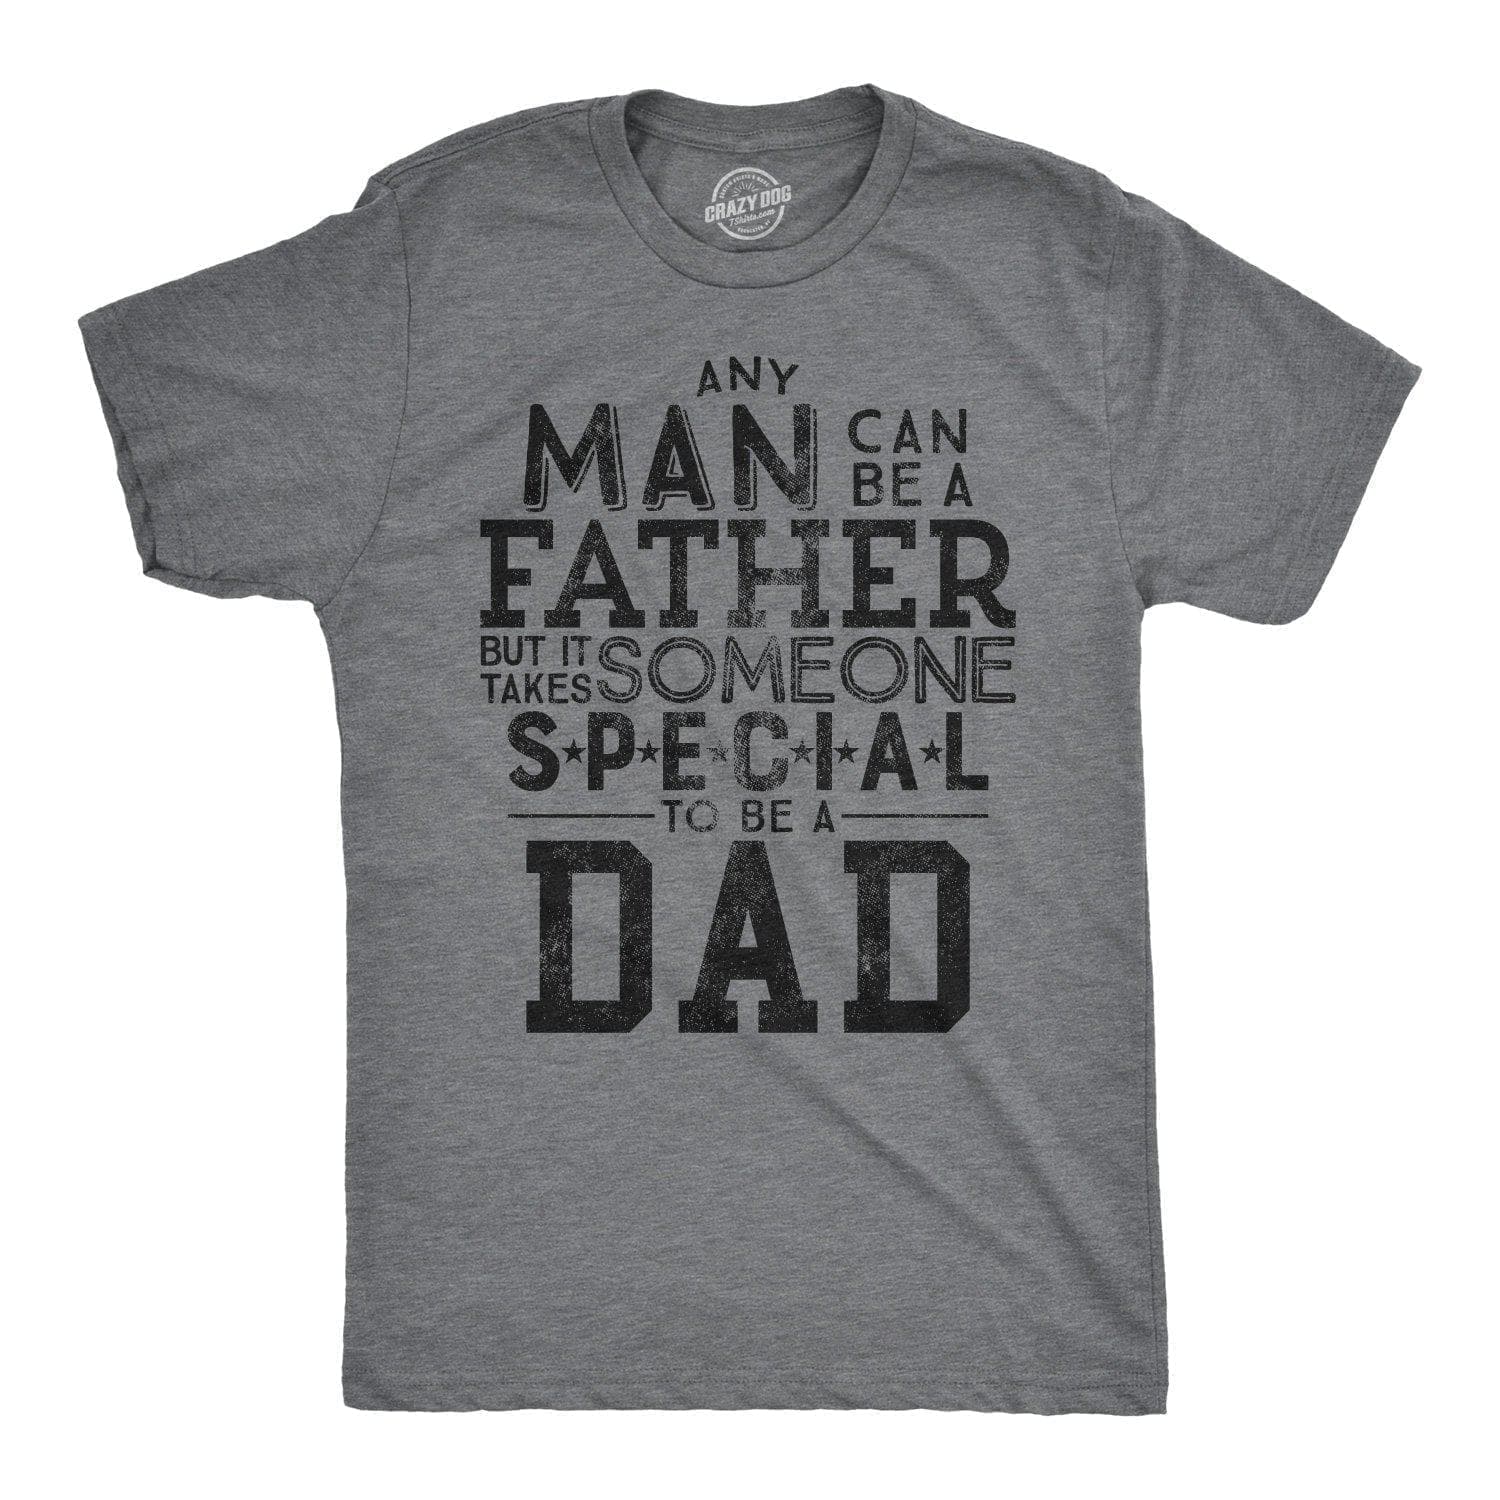 It Takes Someone Special To Be A Dad Men's Tshirt  -  Crazy Dog T-Shirts